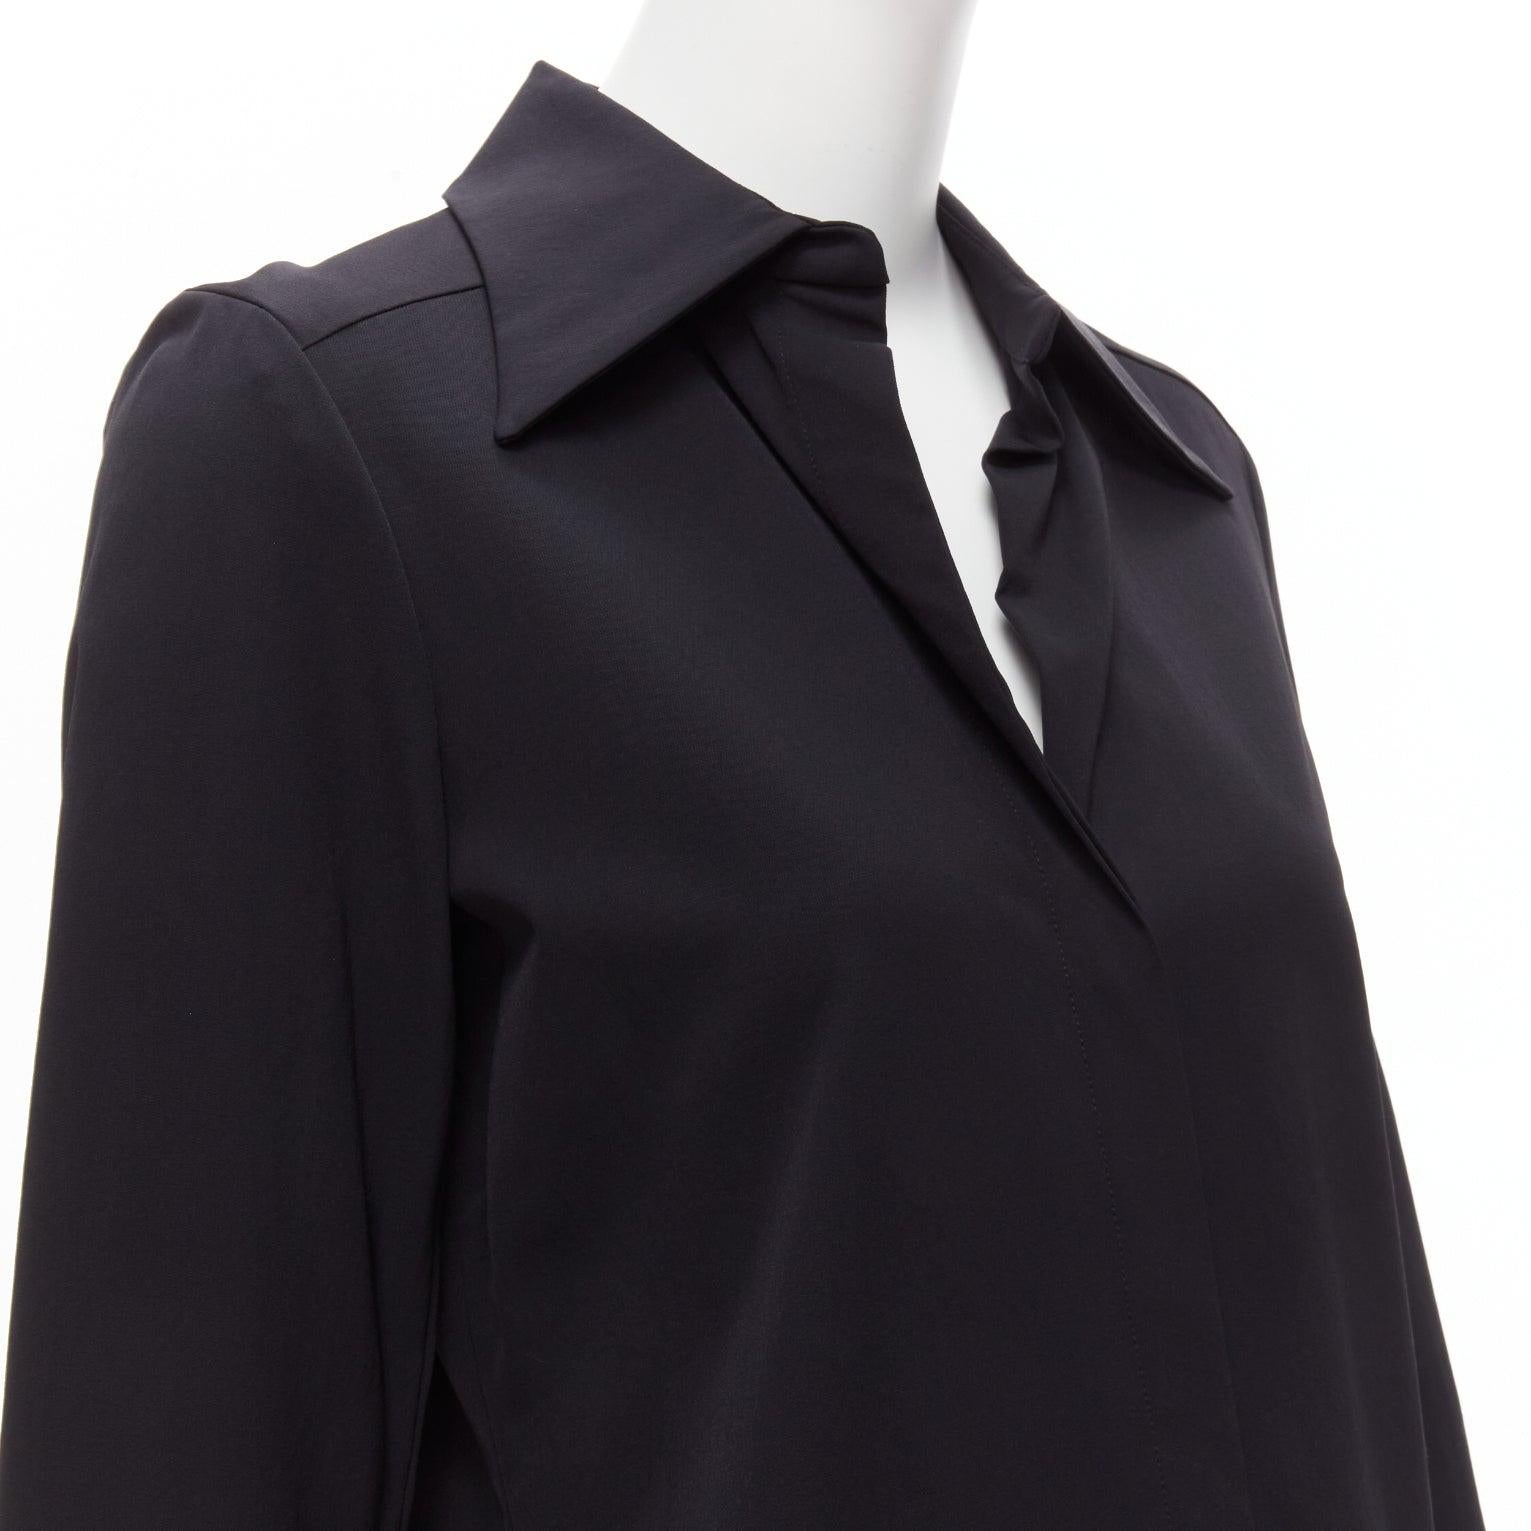 GUCCI Vintage black minimal concealed buttons wide collar shirt top IT38 XS
Reference: TGAS/D00560
Brand: Gucci
Material: Rayon, Blend
Color: Black
Pattern: Solid
Closure: Button
Extra Details: Invisible placket.
Made in: